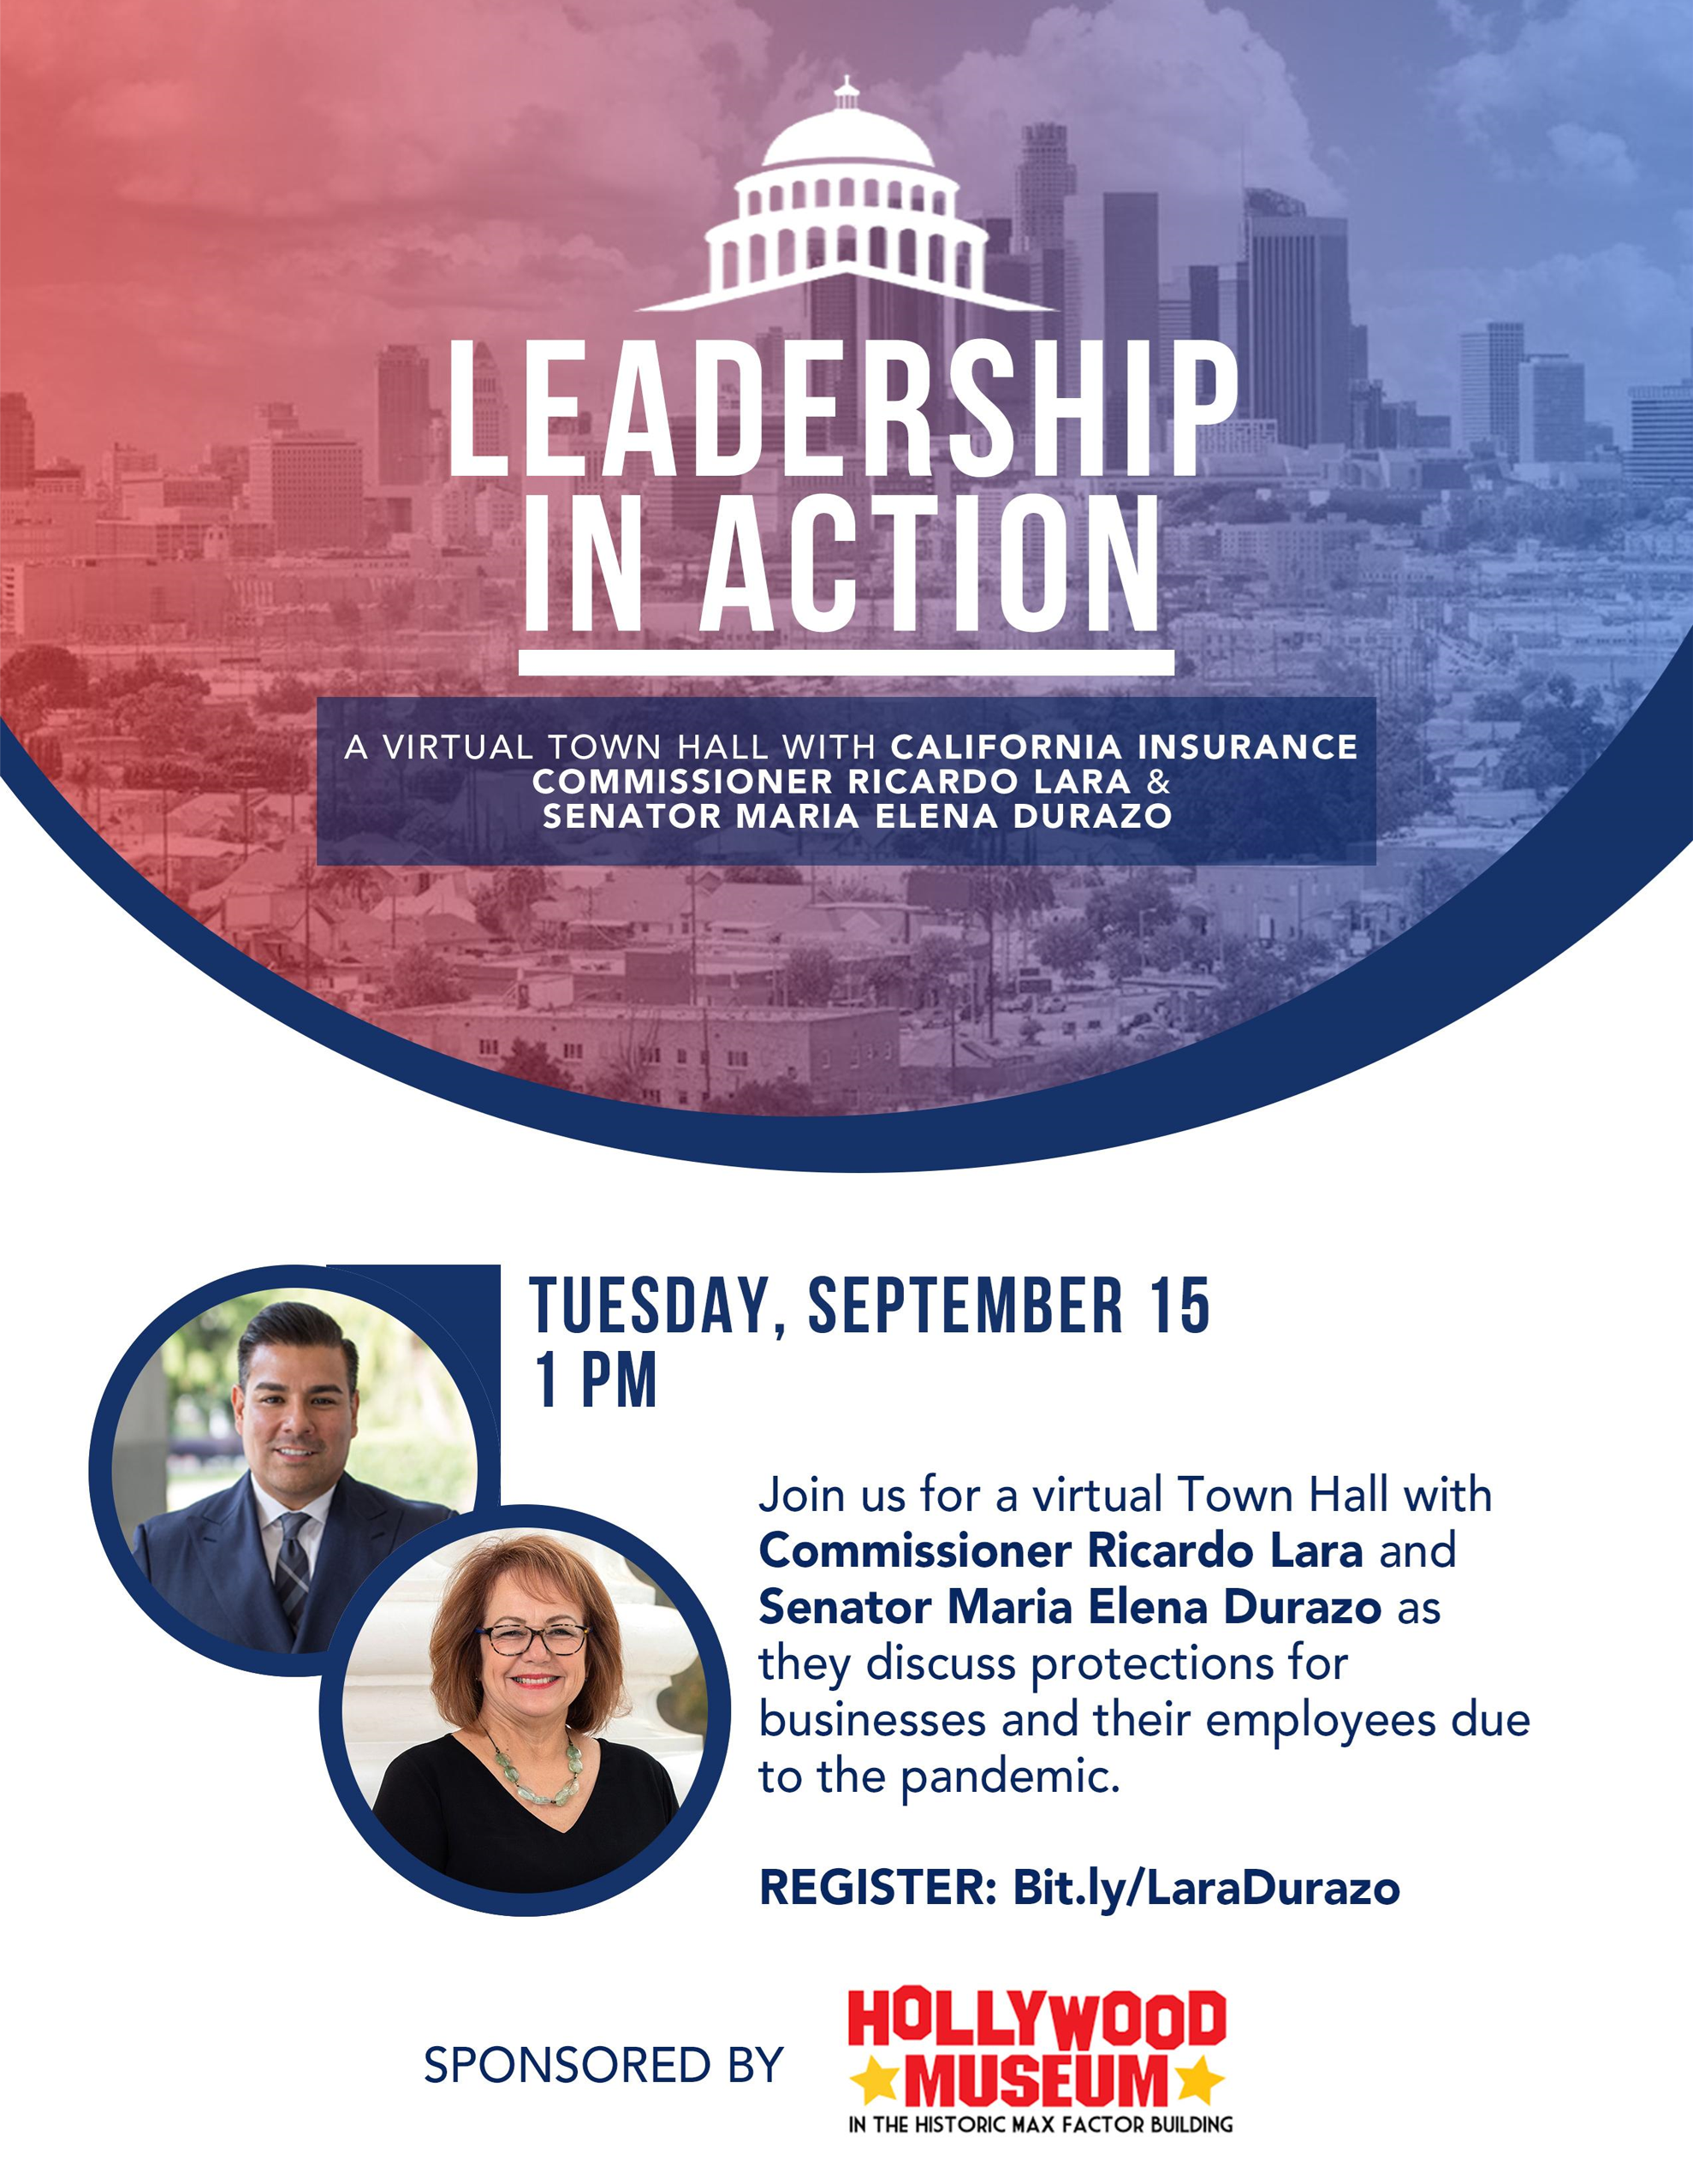 Join us for a Virtual Town hall with California Insurance Commissioner Ricardo Lara and Senator Maria Elena Durazo.  on Tuesday, September 15th, 2020 at 1pm, to discuss protections for  businesses and their employees due to the pandemic.